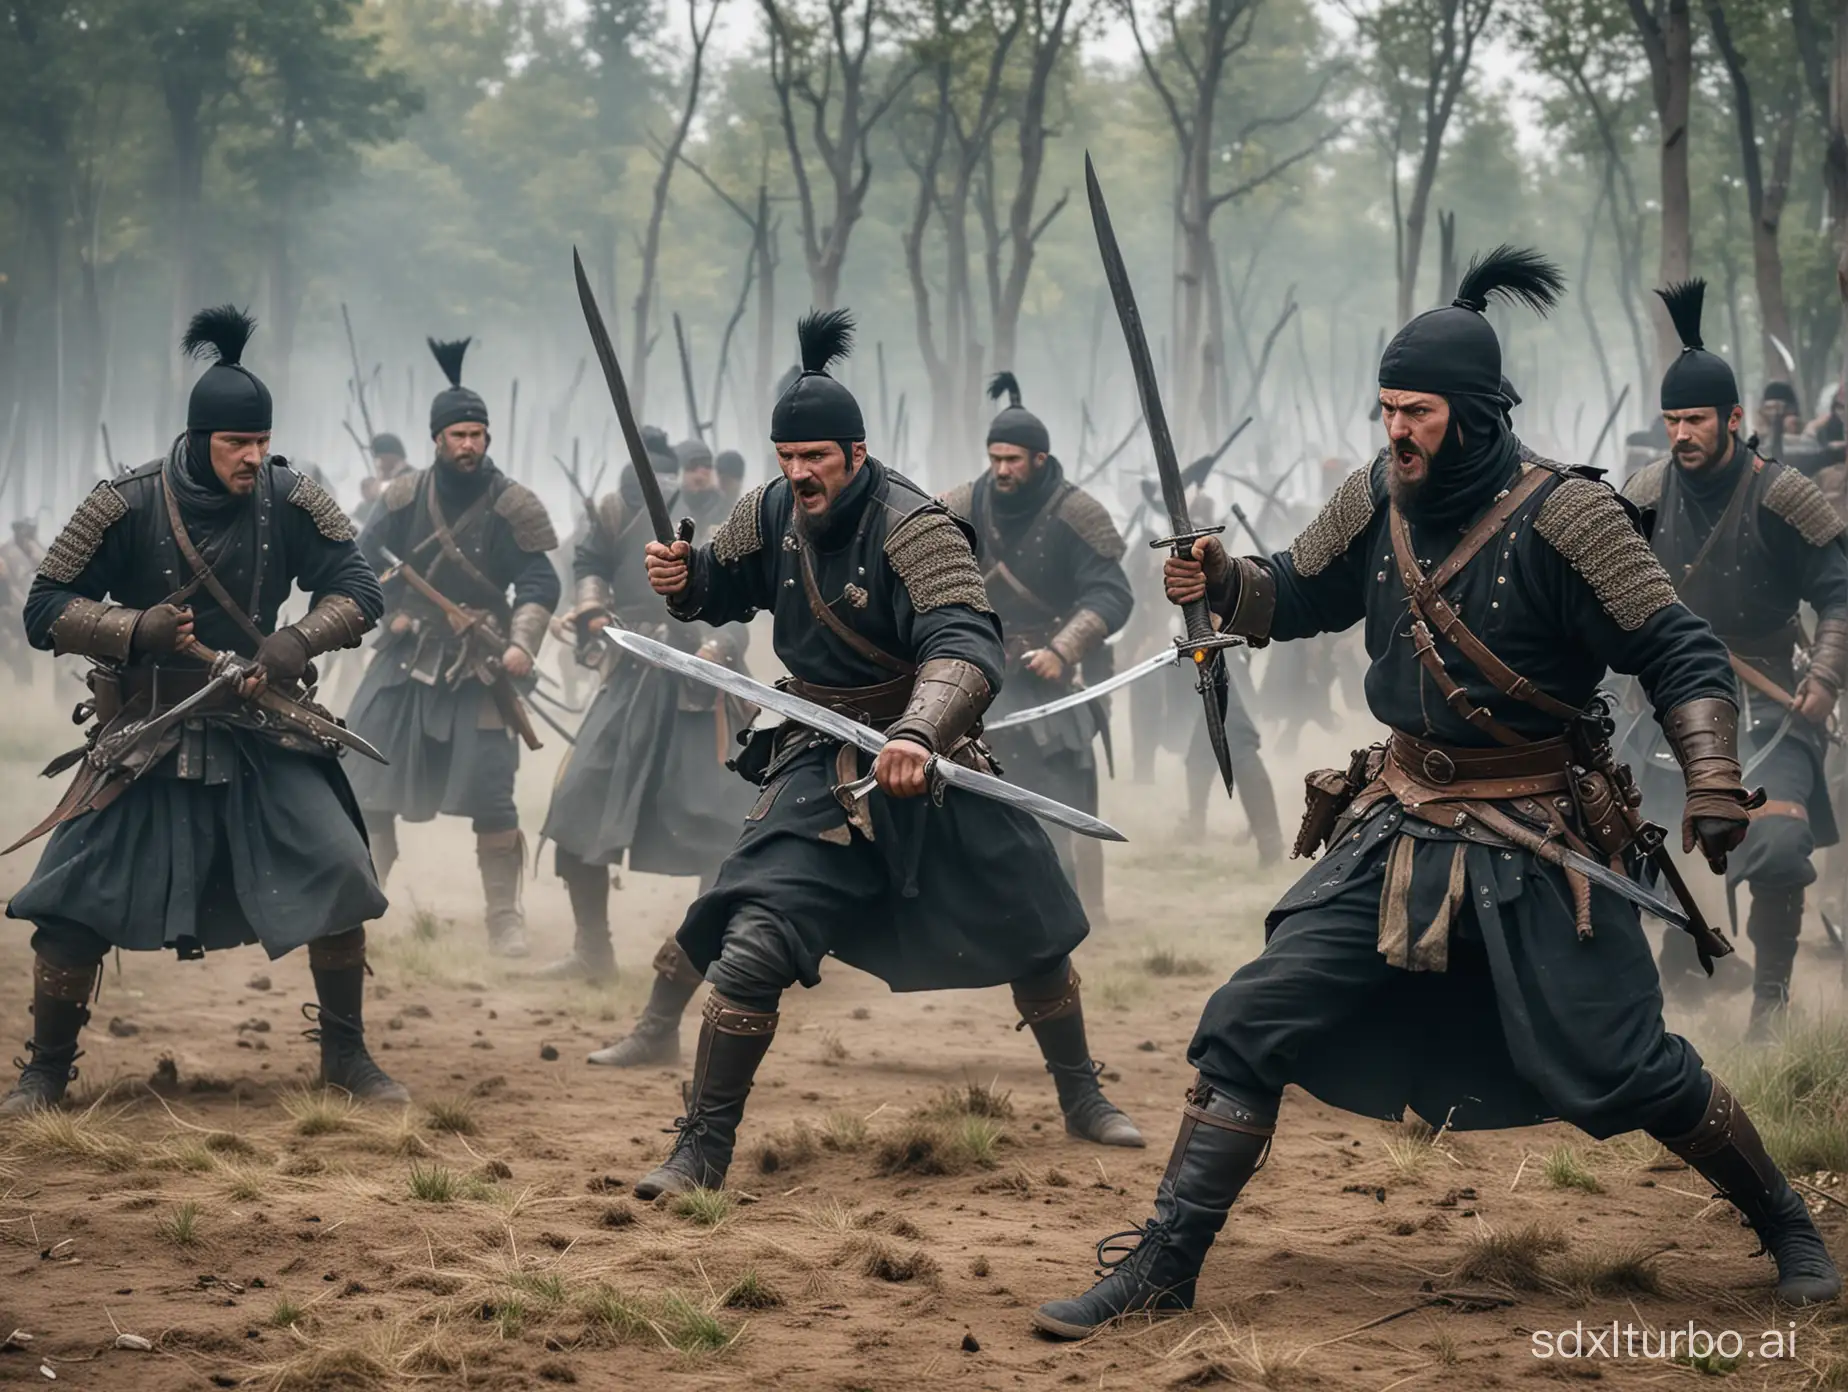 Medieval-Infantry-Engage-in-Sword-Fight-with-Bandits-Resembling-Ukrainian-Cossacks